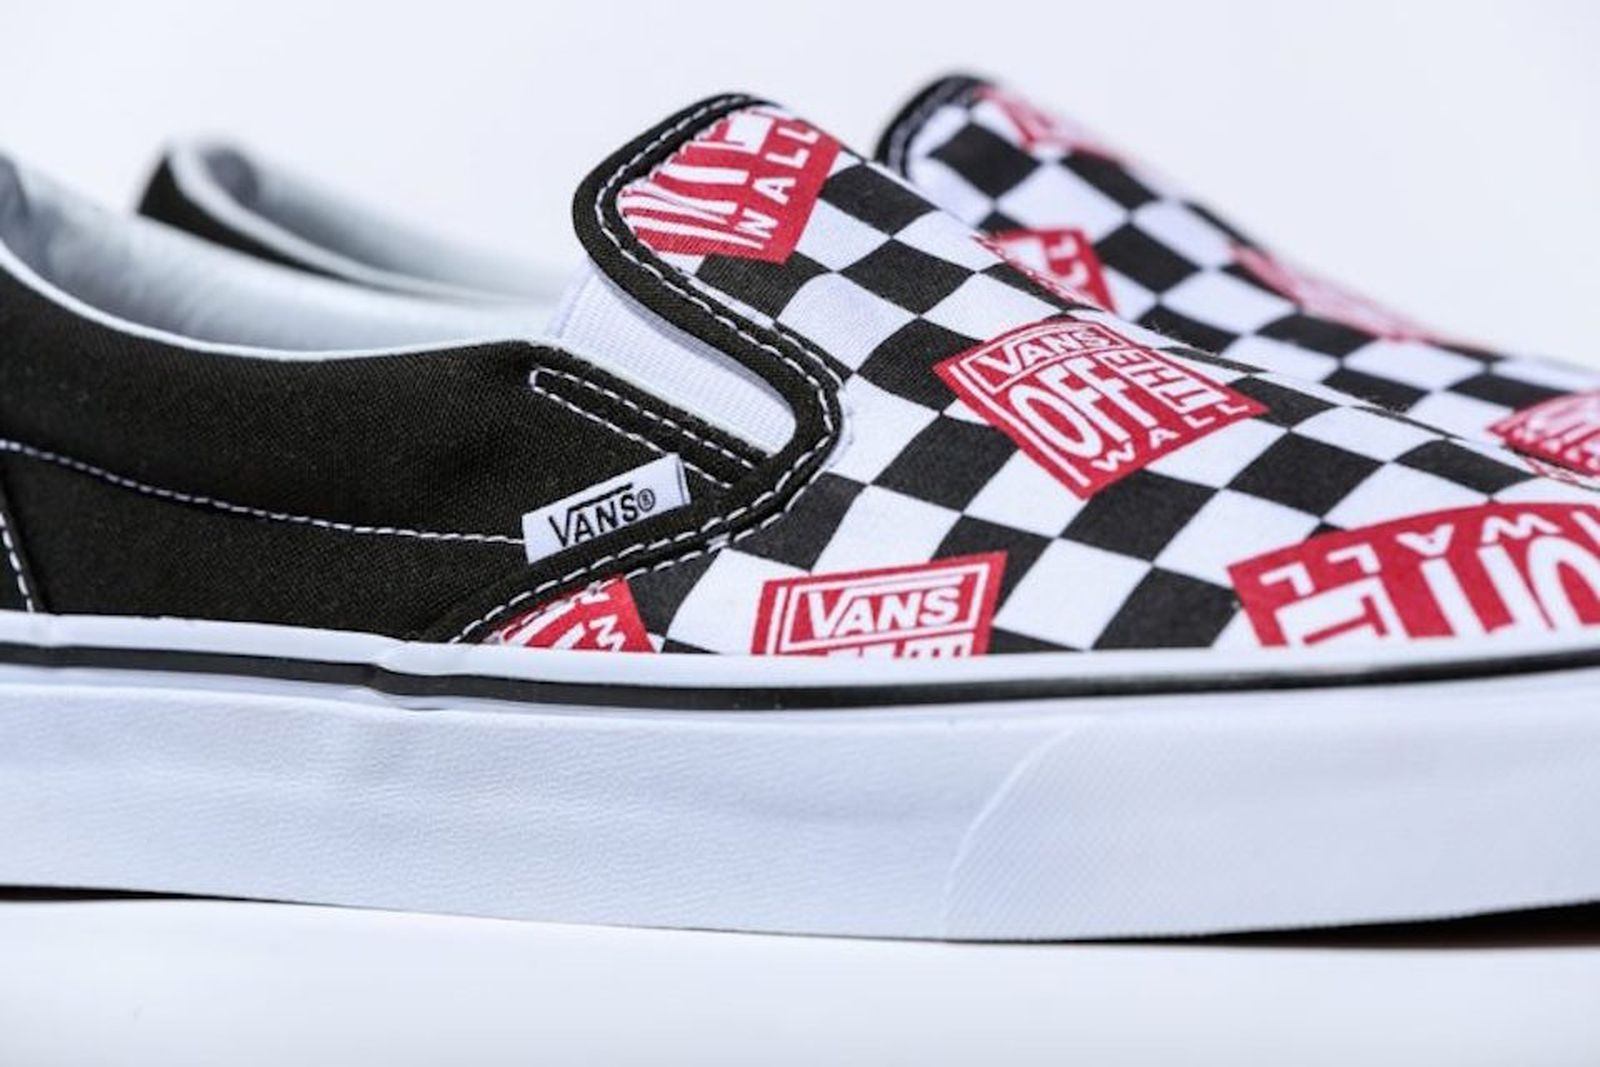 Strait Nine set a fire Here's How to Cop BILLY'S' Vans "Off The Wall Check" Slip-On